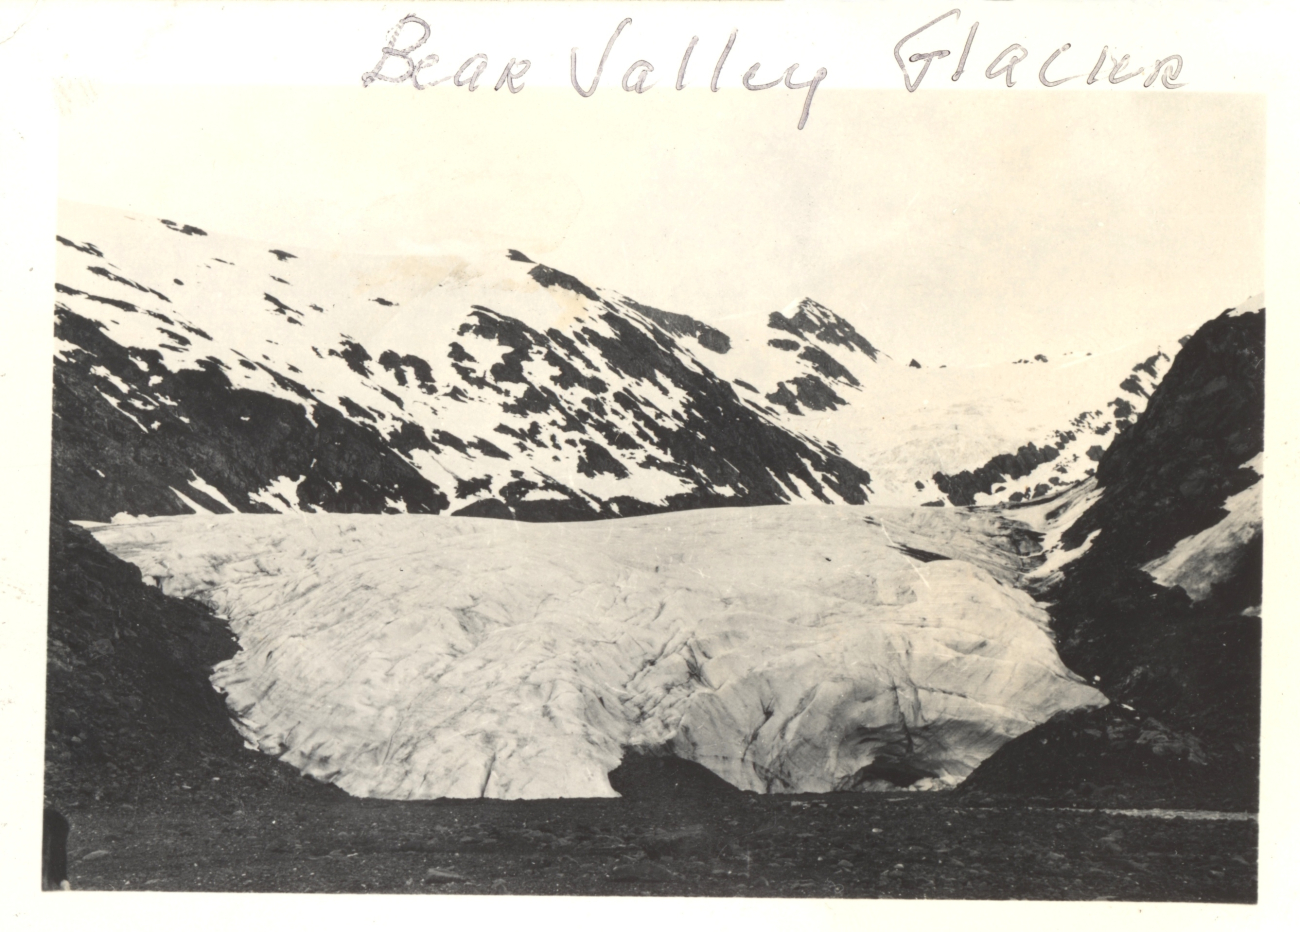 Apparently Portage Glacier which is located in Bear Valley